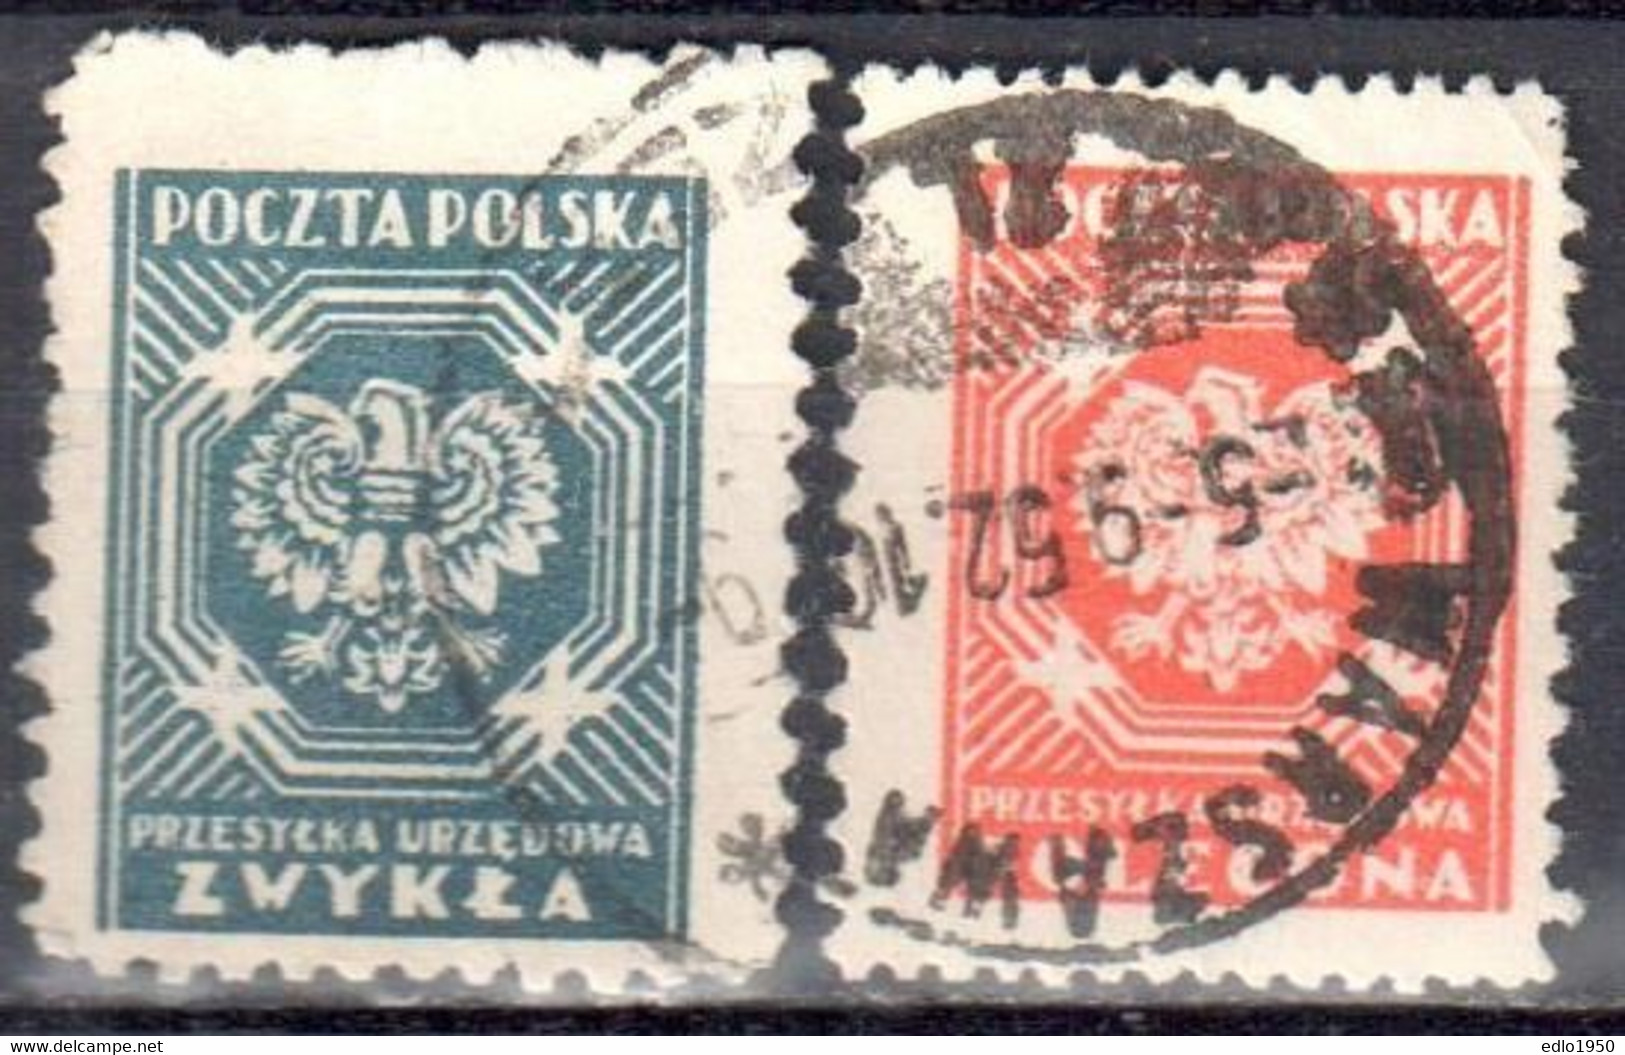 Poland 1950-54 - Official Stamps - Mi.25-26 - Used - Service